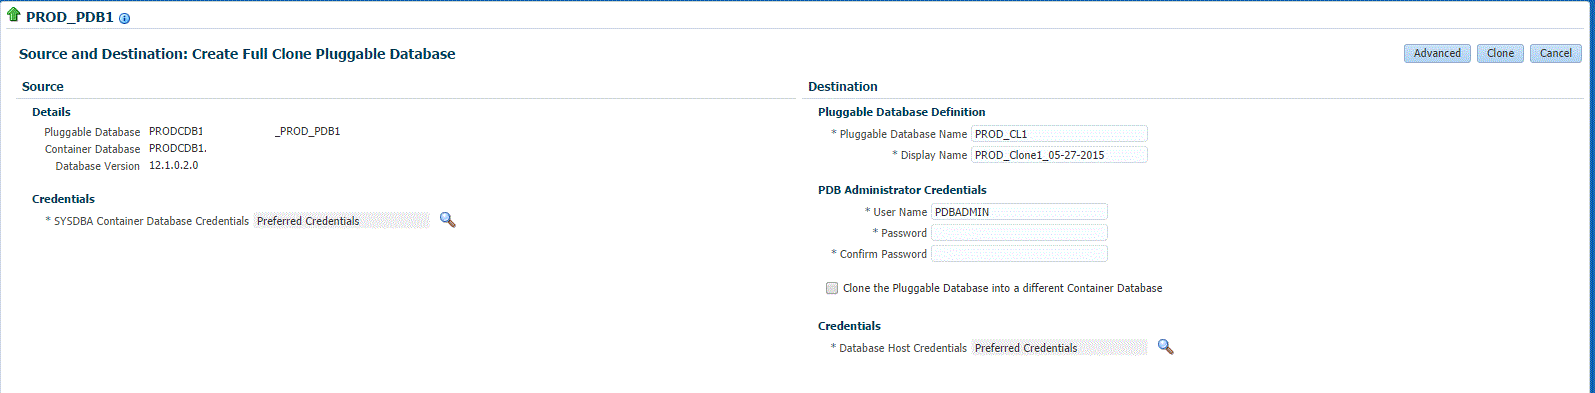 Source and Destination Full Clone PDB simple page